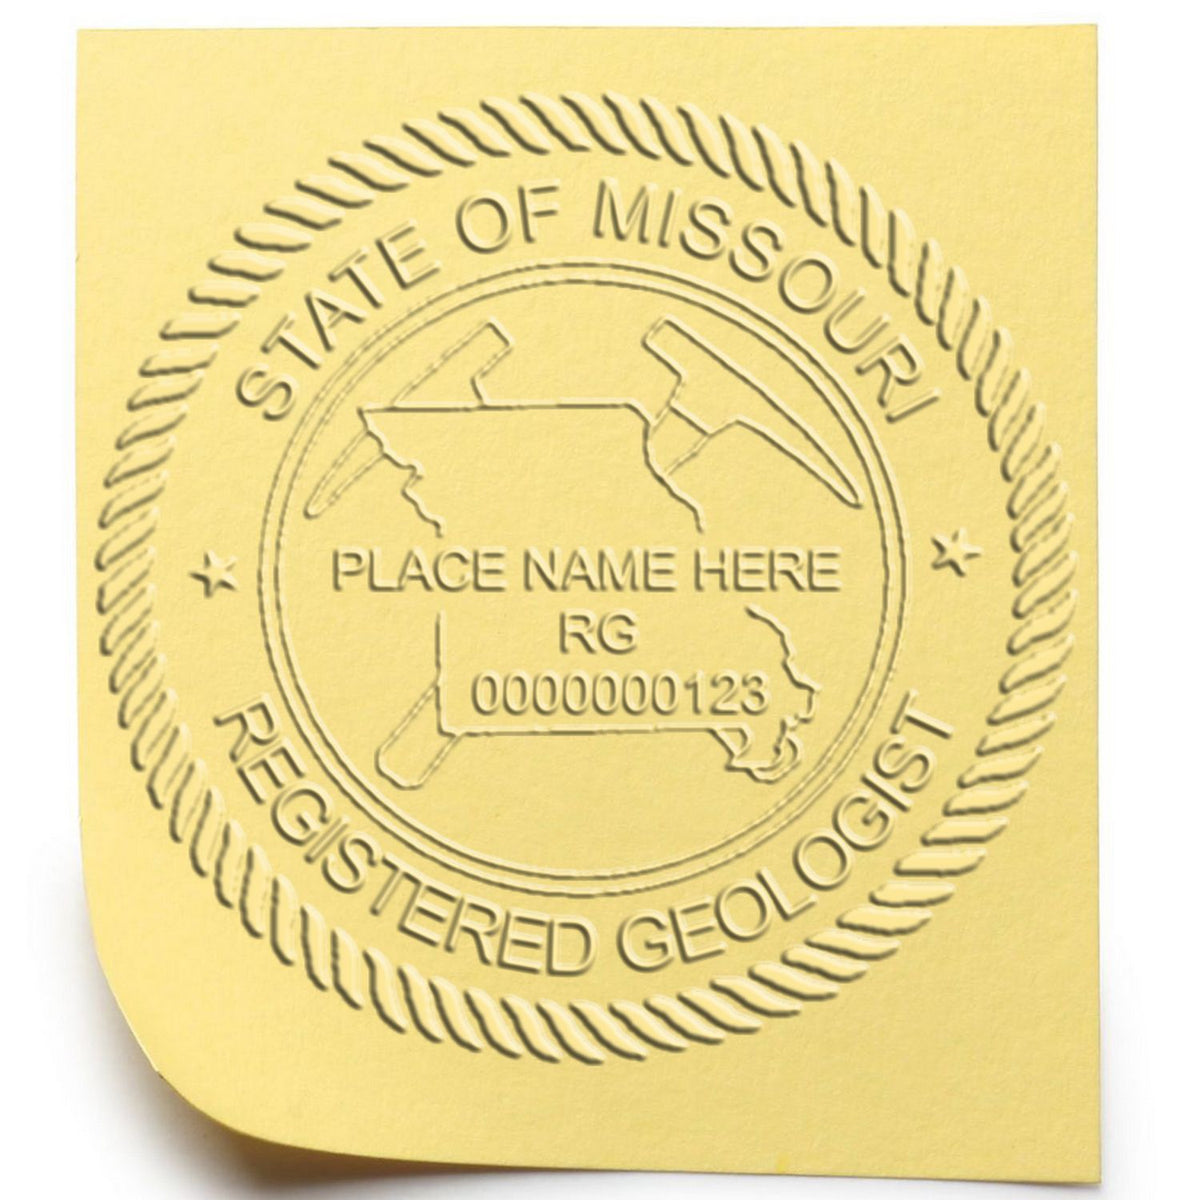 An alternative view of the State of Missouri Extended Long Reach Geologist Seal stamped on a sheet of paper showing the image in use